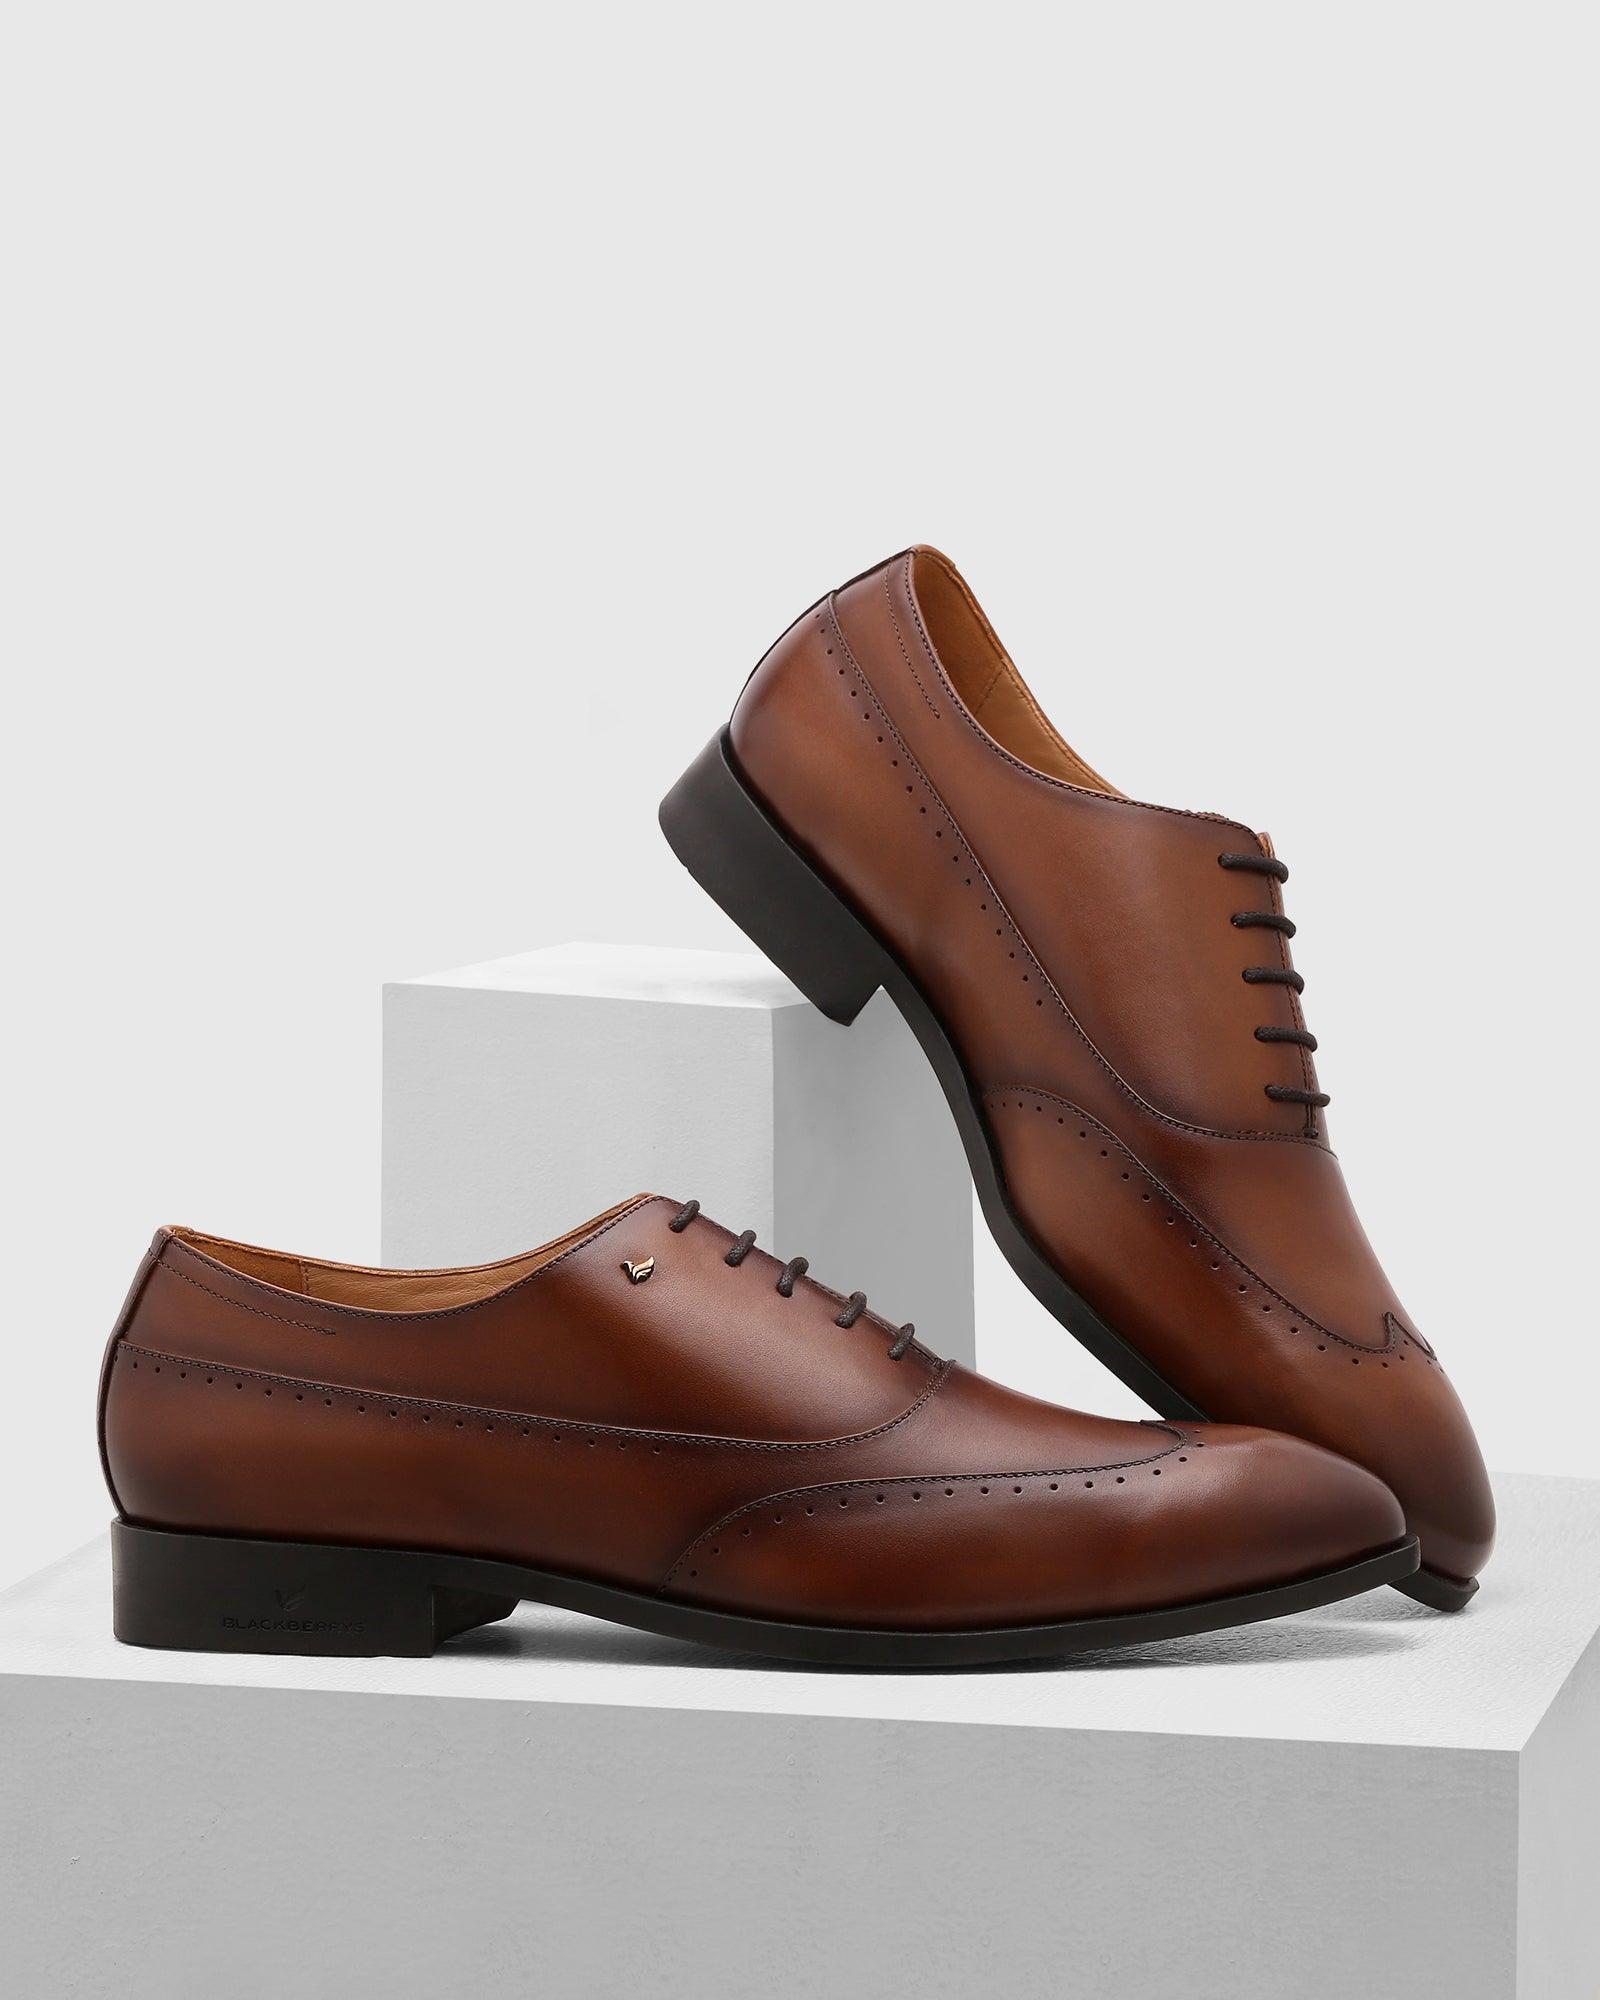 leather-oxford-shoes-in-tan-(qusso)